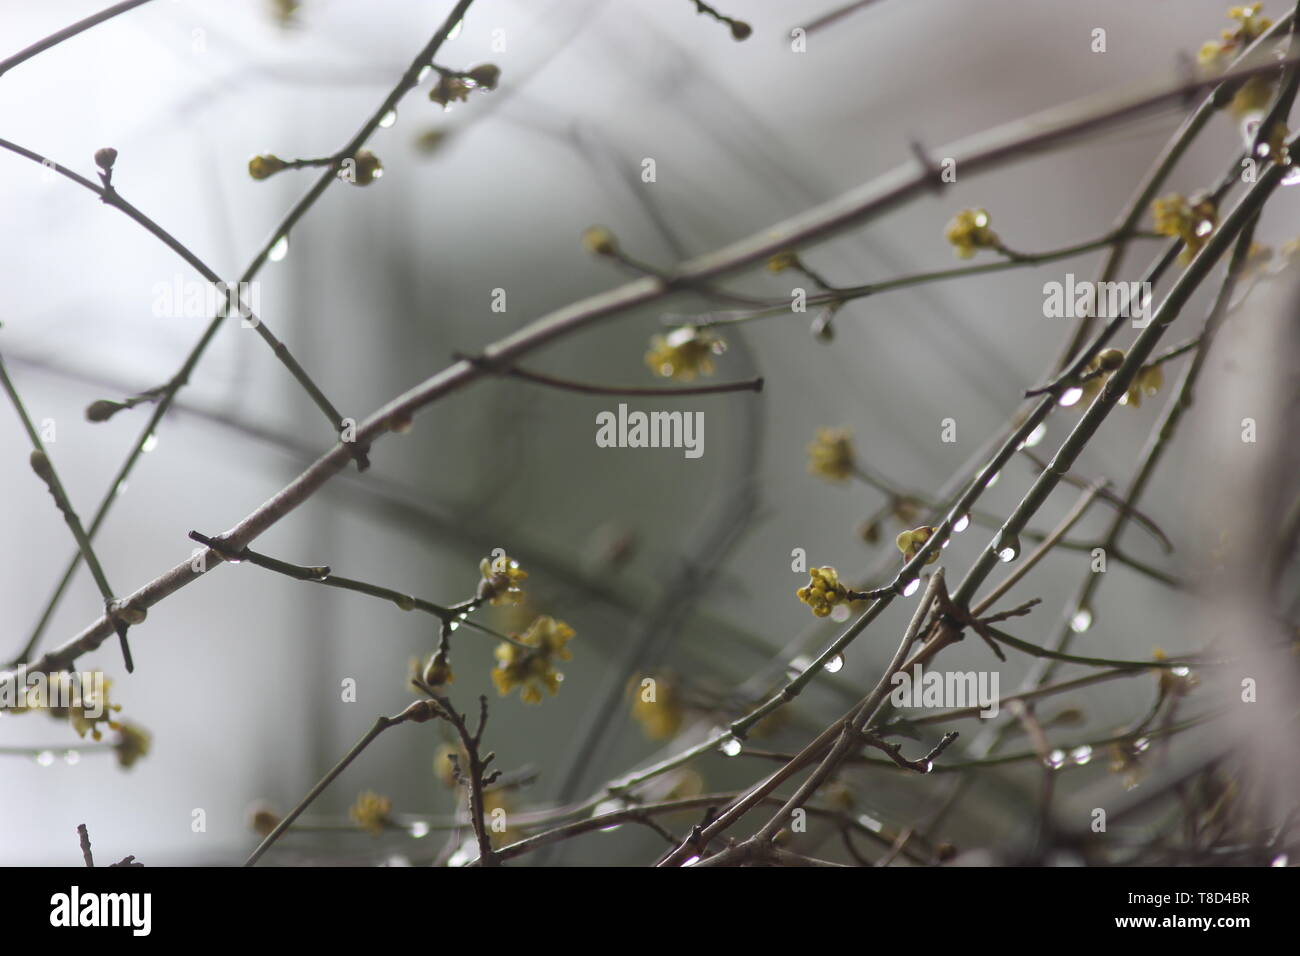 Bad rainy weather continues, but rain shows itself from its poetic side. Stock Photo